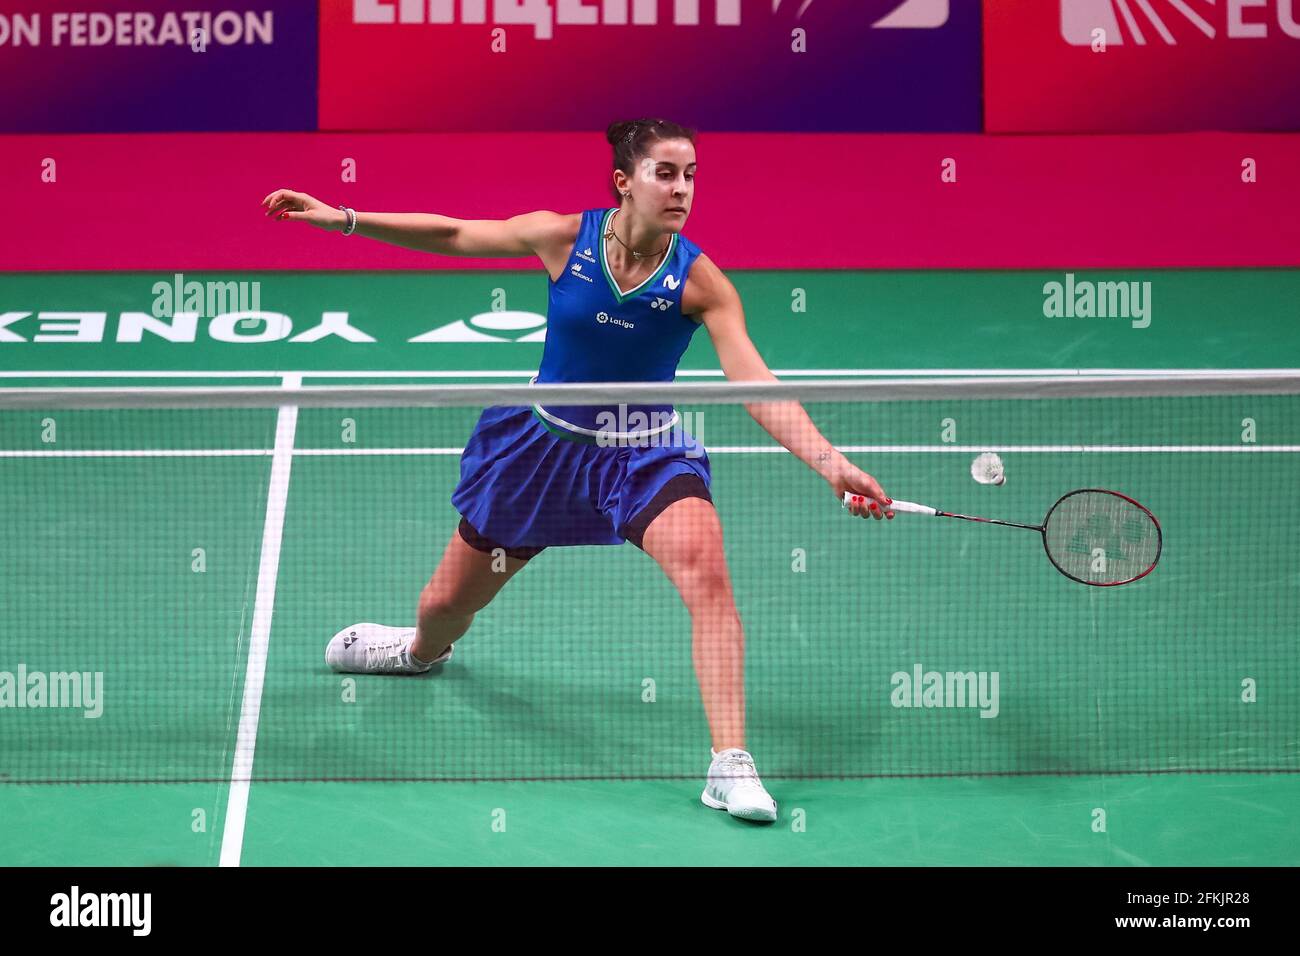 KYIV, UKRAINE - MAY 2: Carolina Marin Of Spain competes in her Womens  Singles Final match against Line Christophersen of Denmark during Day 6 of  the 2021 European Badminton Championships at Palace